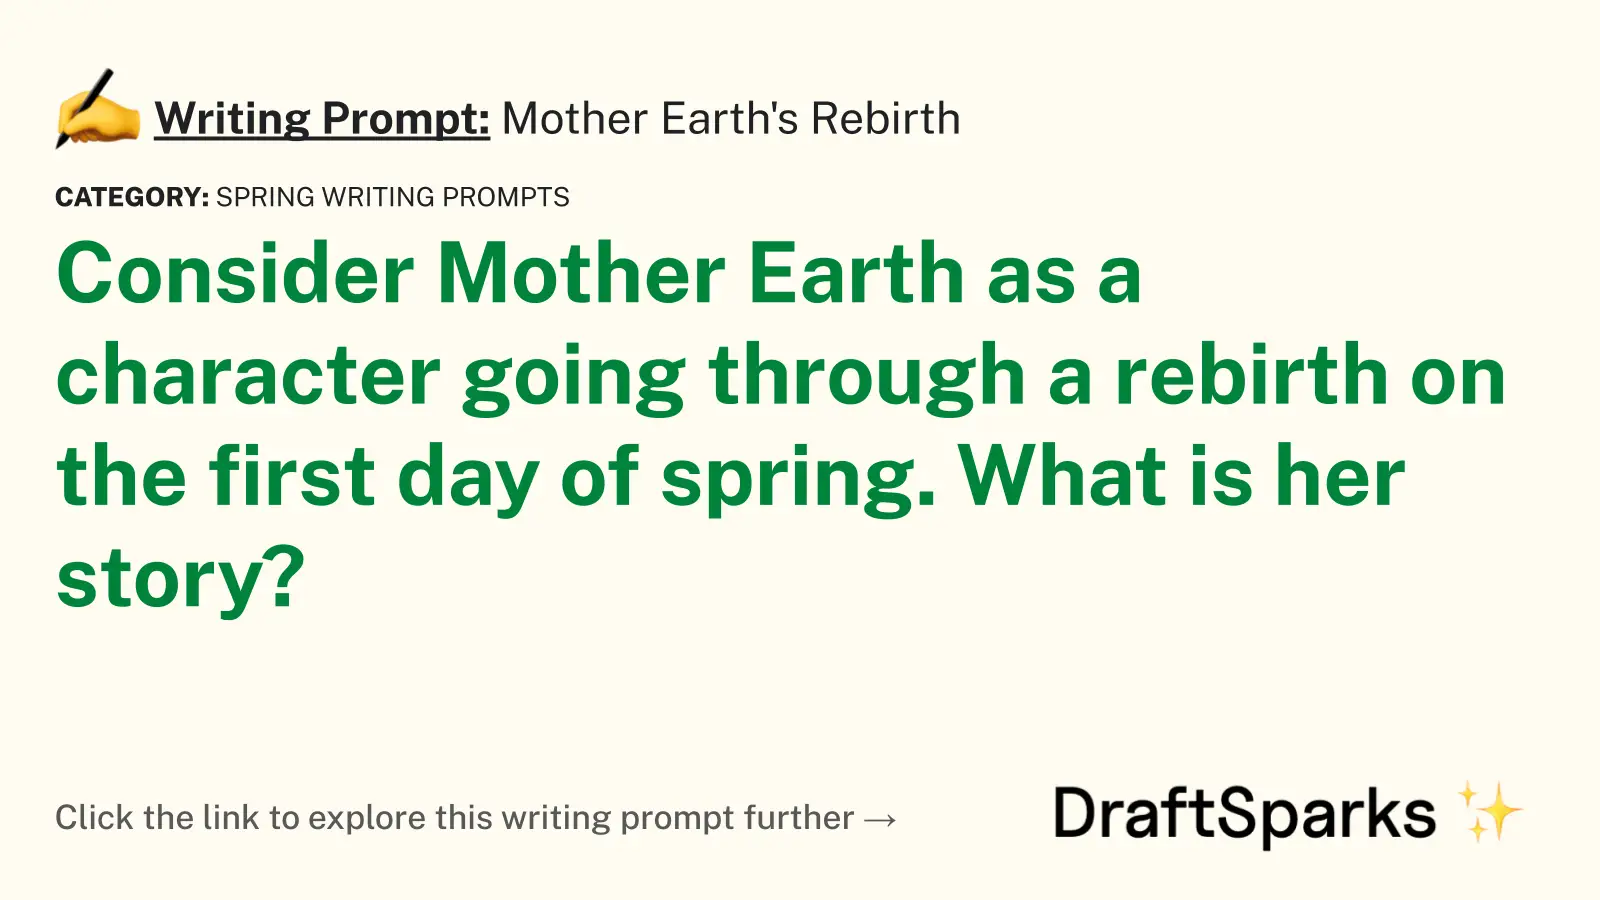 Mother Earth’s Rebirth